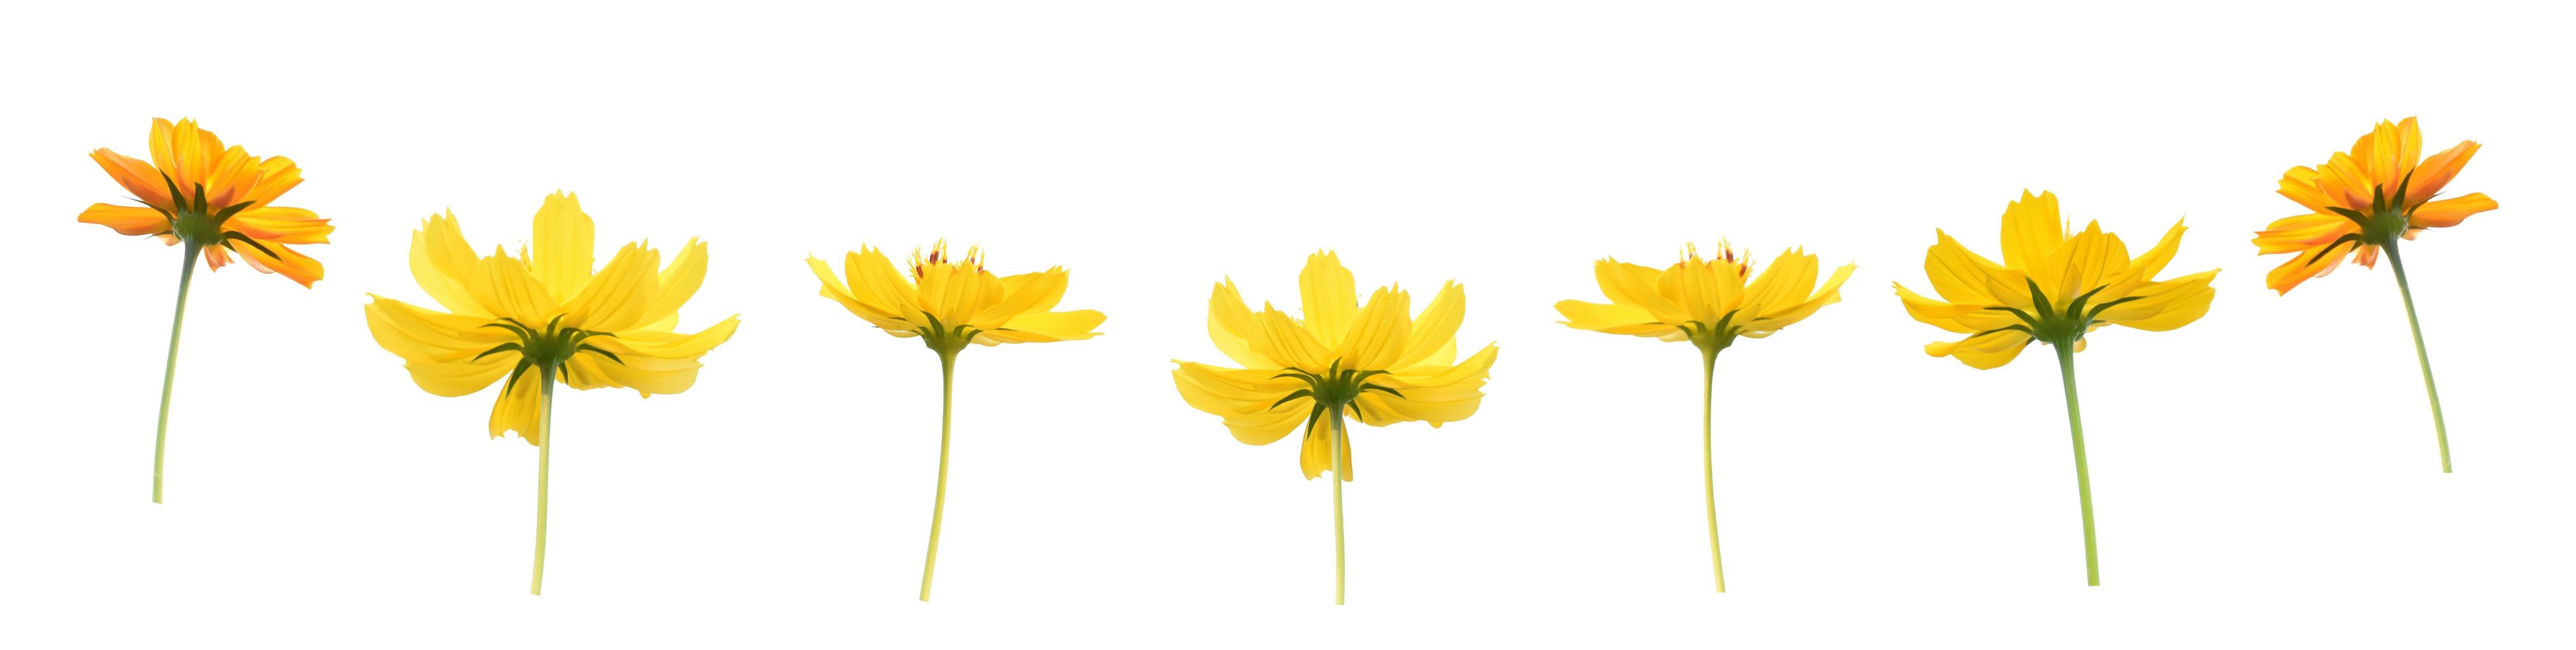 Isolated yellow cosmos flowers with clipping paths. photo